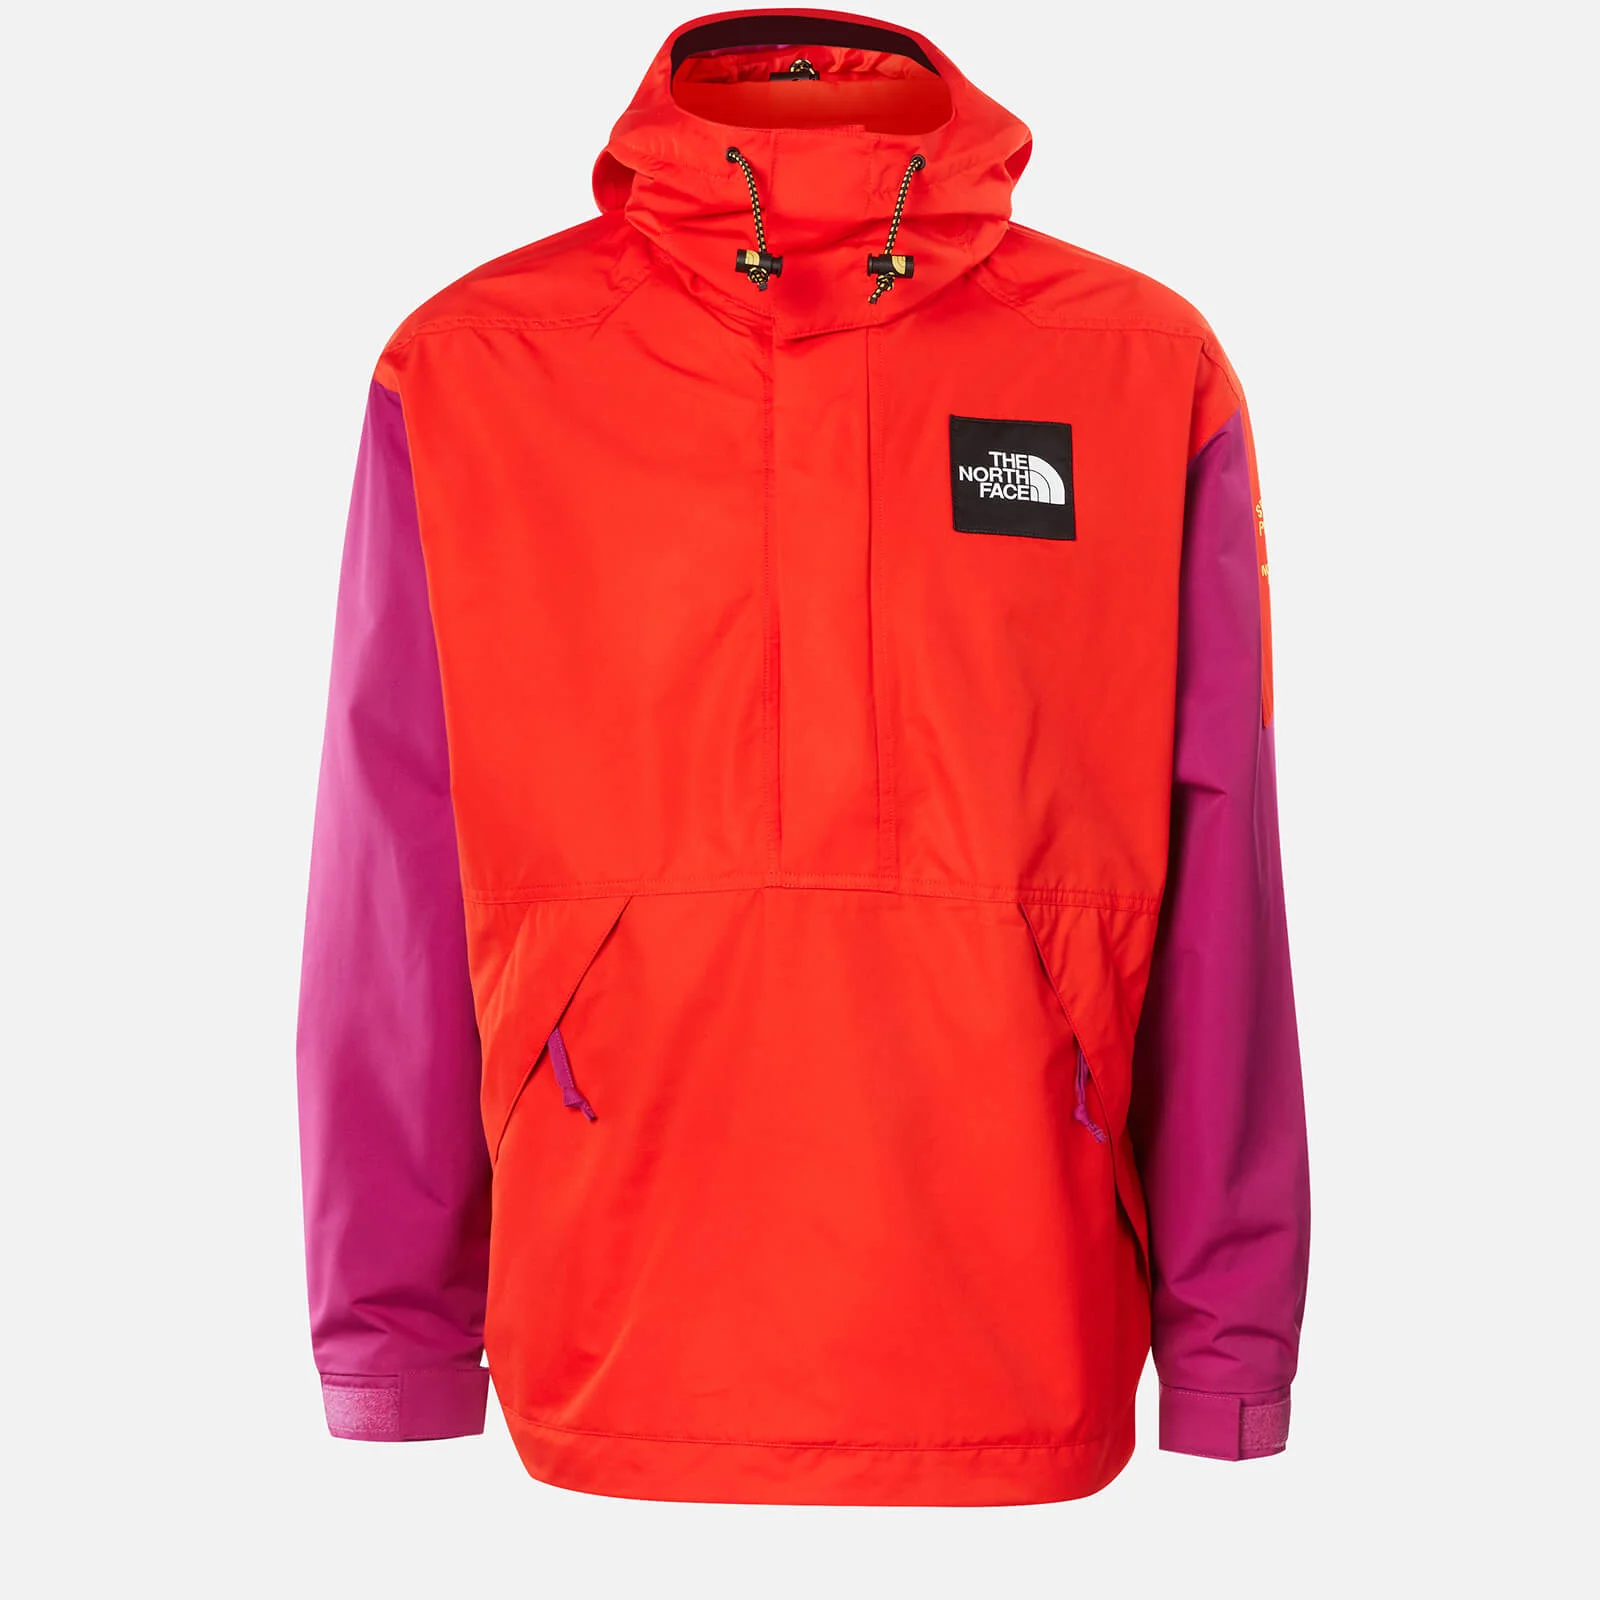 The North Face Men's Headpoint Jacket - Fiery Red Image 1